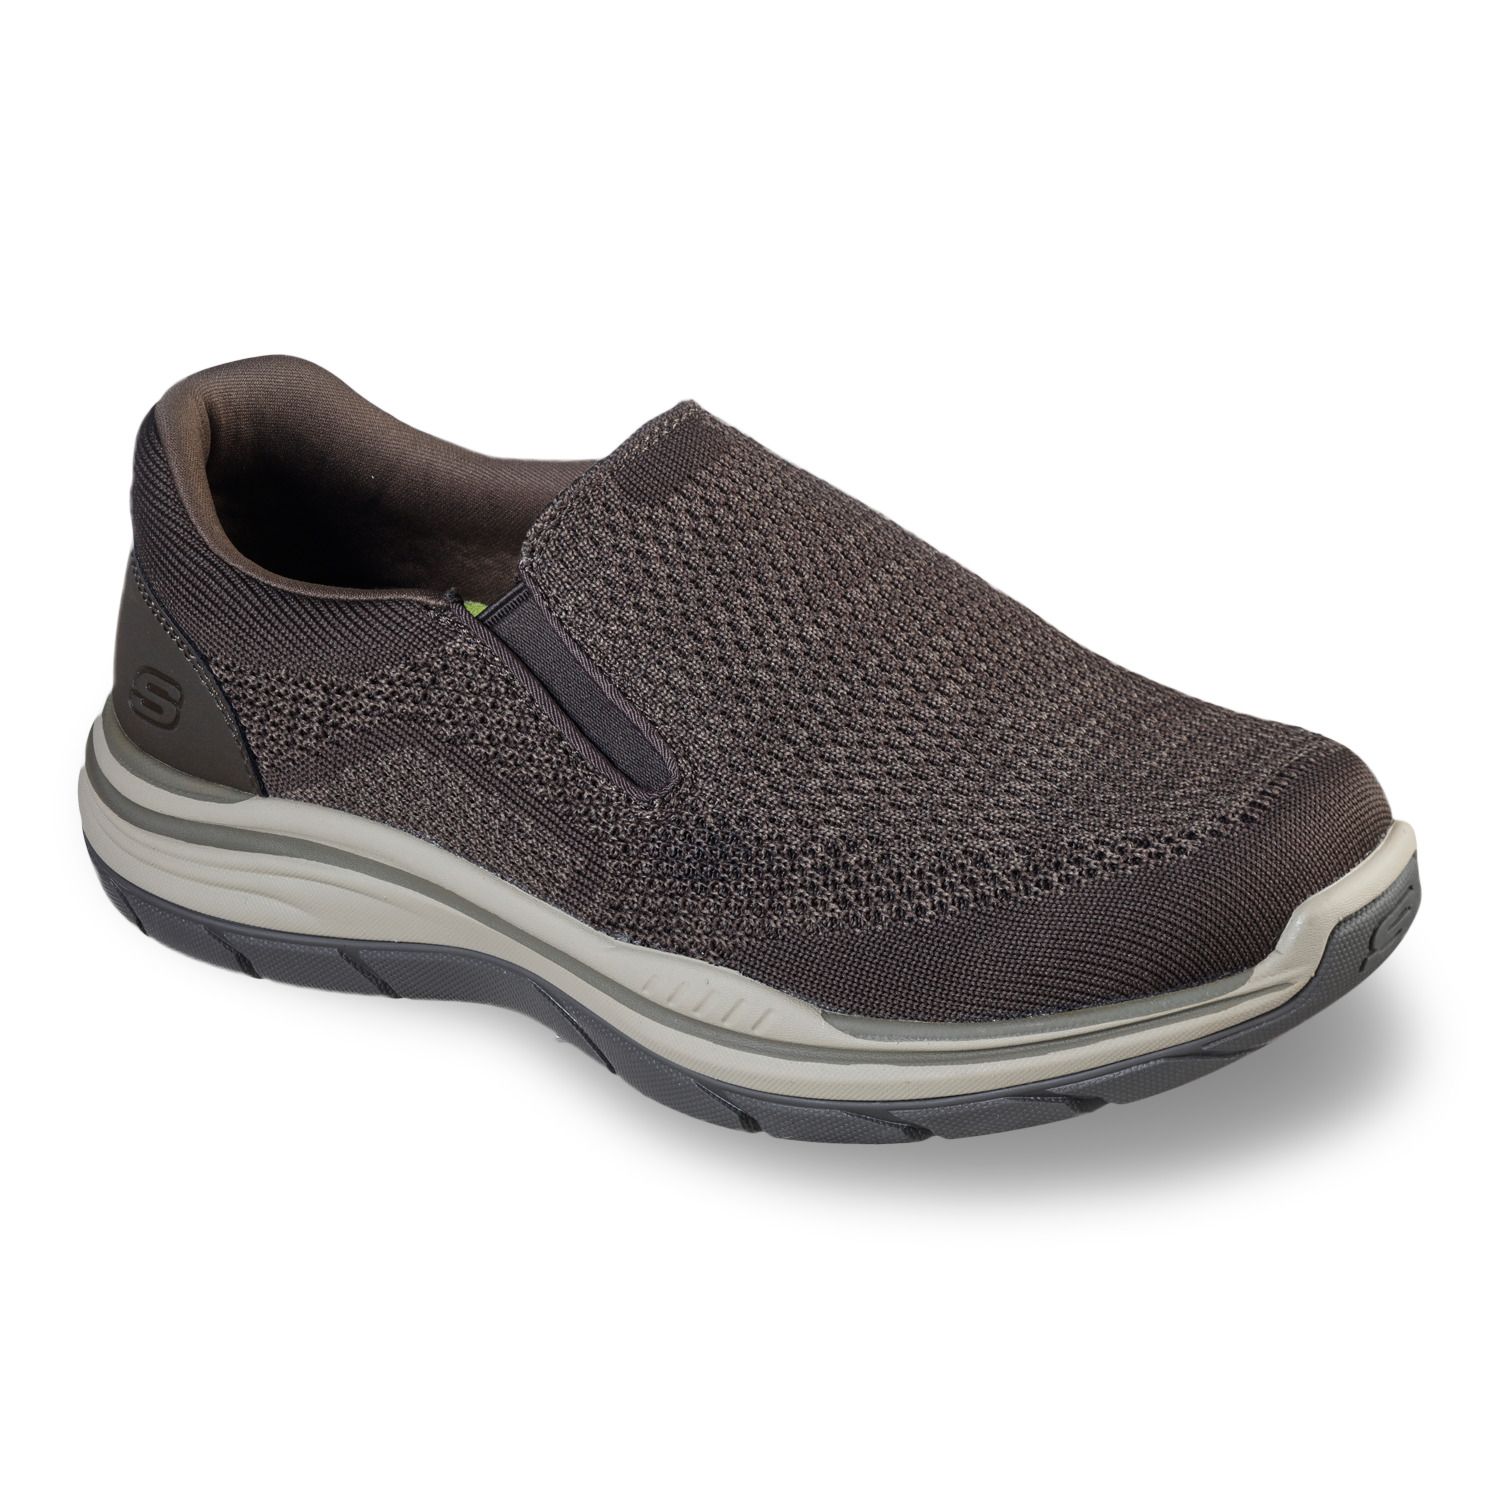 skechers relaxed fit men's shoes